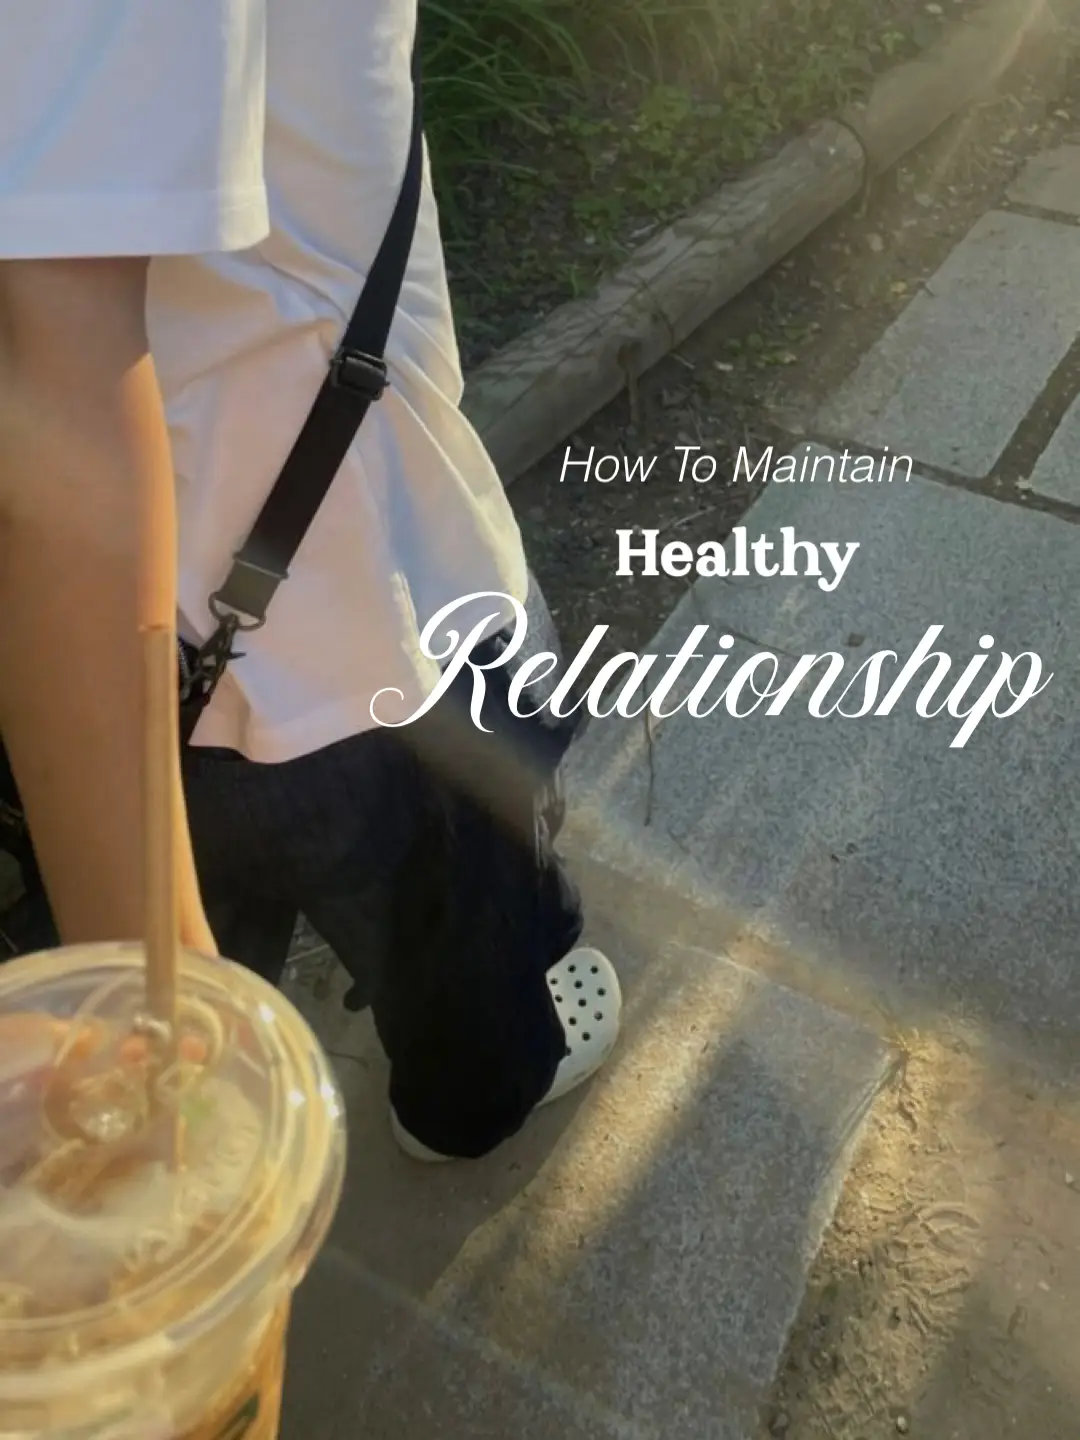 Maintaining a Healthy Relationship 's images(0)